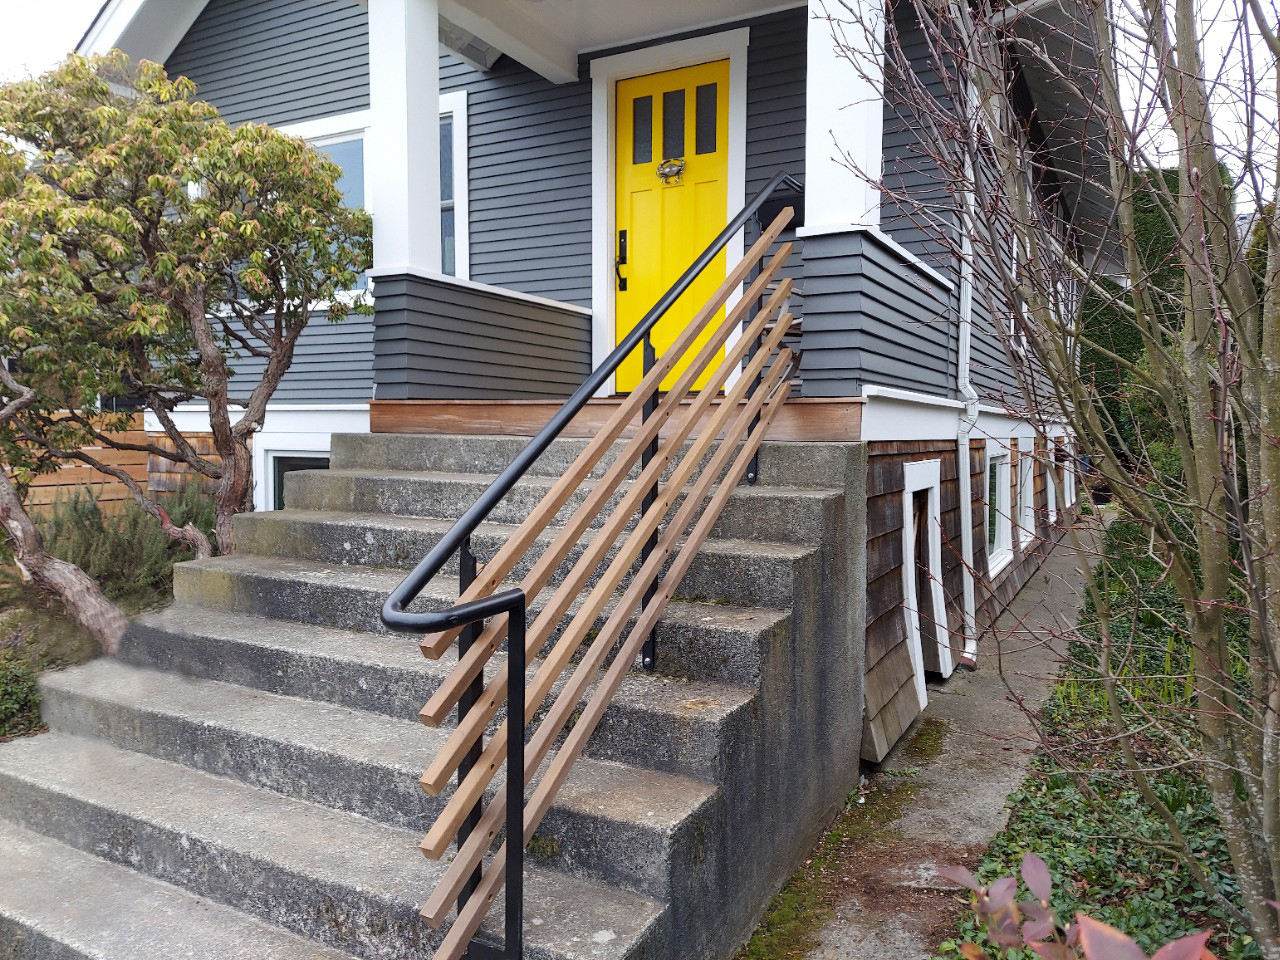 Bright yellow front door with updated porch railings.